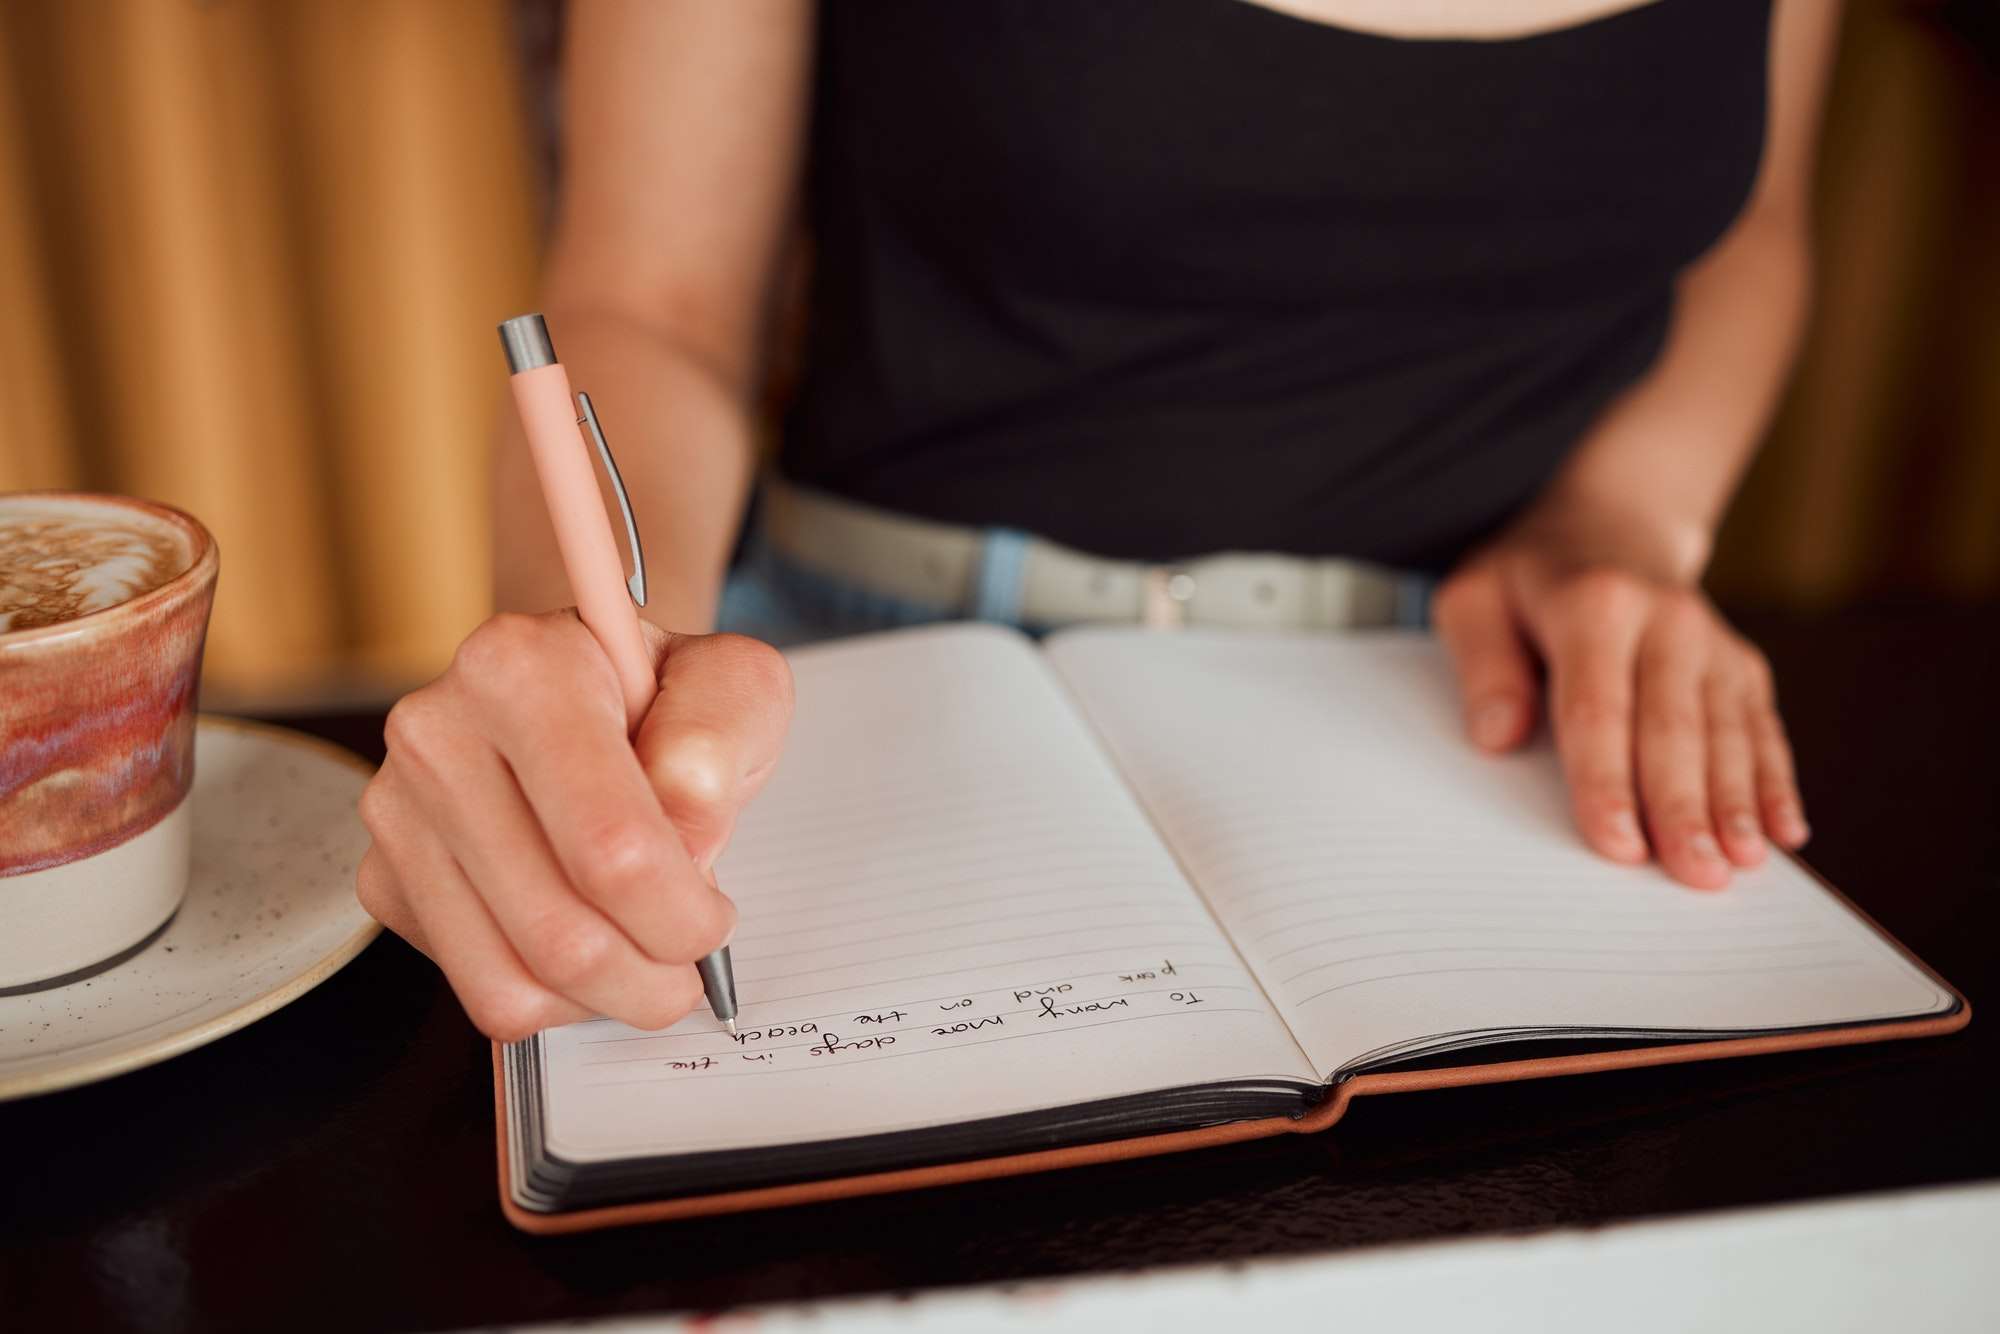 Woman writing thoughts in notebook, taking notes and doing morning journal routine at home from abo